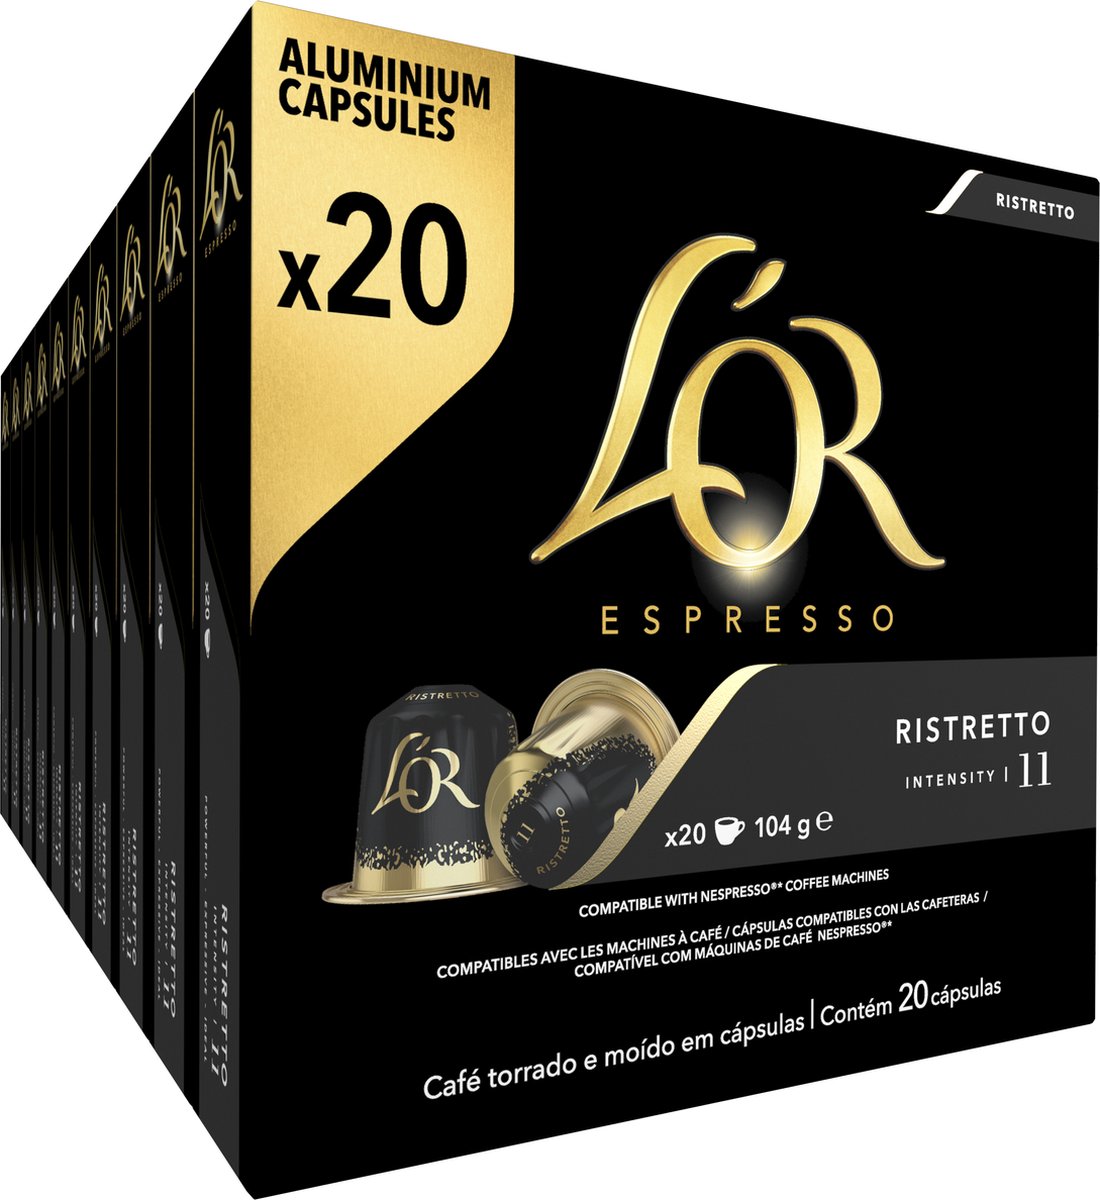 L'OR Espresso Ristretto Koffiecups - Intensiteit 11/12 - 10 x 20 capsules - L'OR